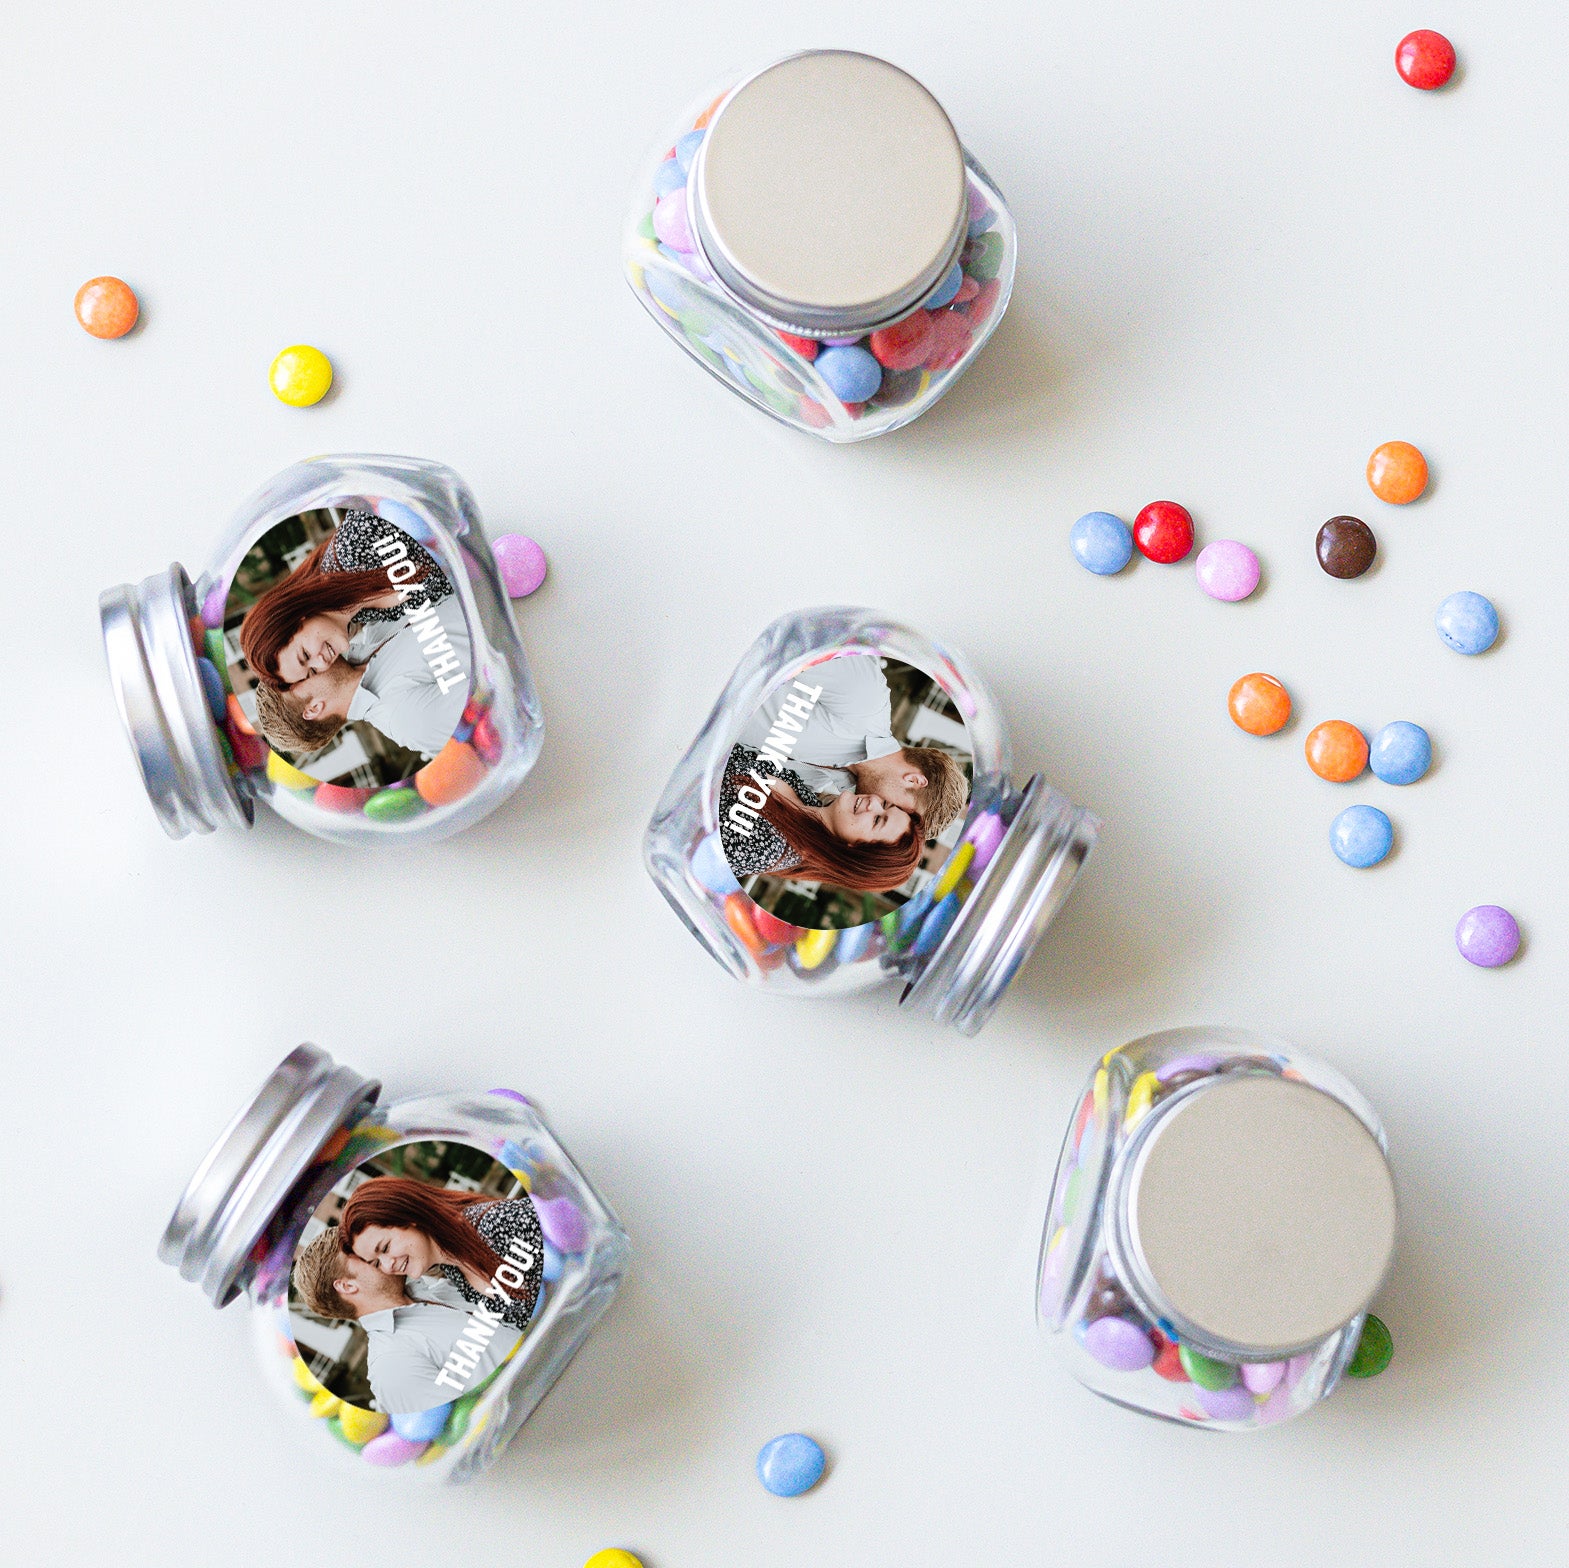 Personalised favours - Chocolates in jar - 100 pcs